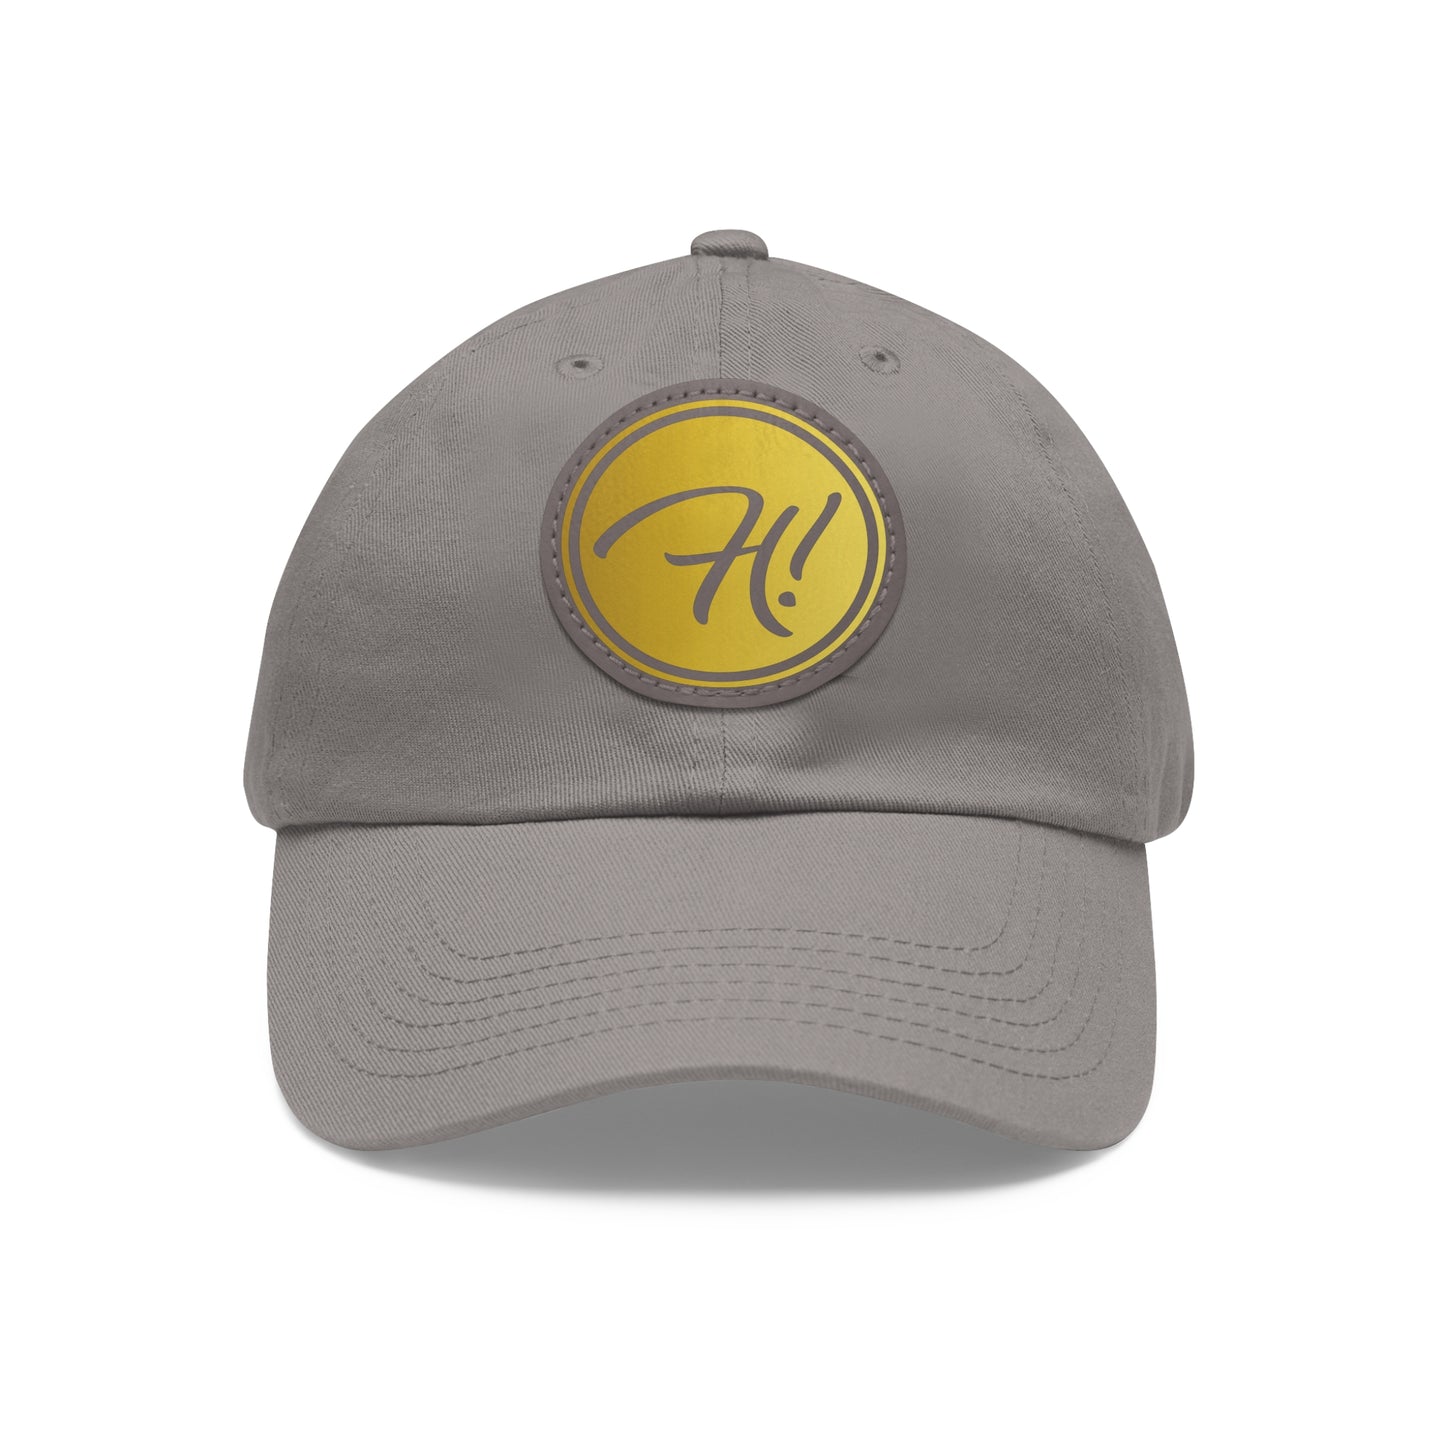 Helga's Hi Hat with Leather Patch Logo - 6 color options!